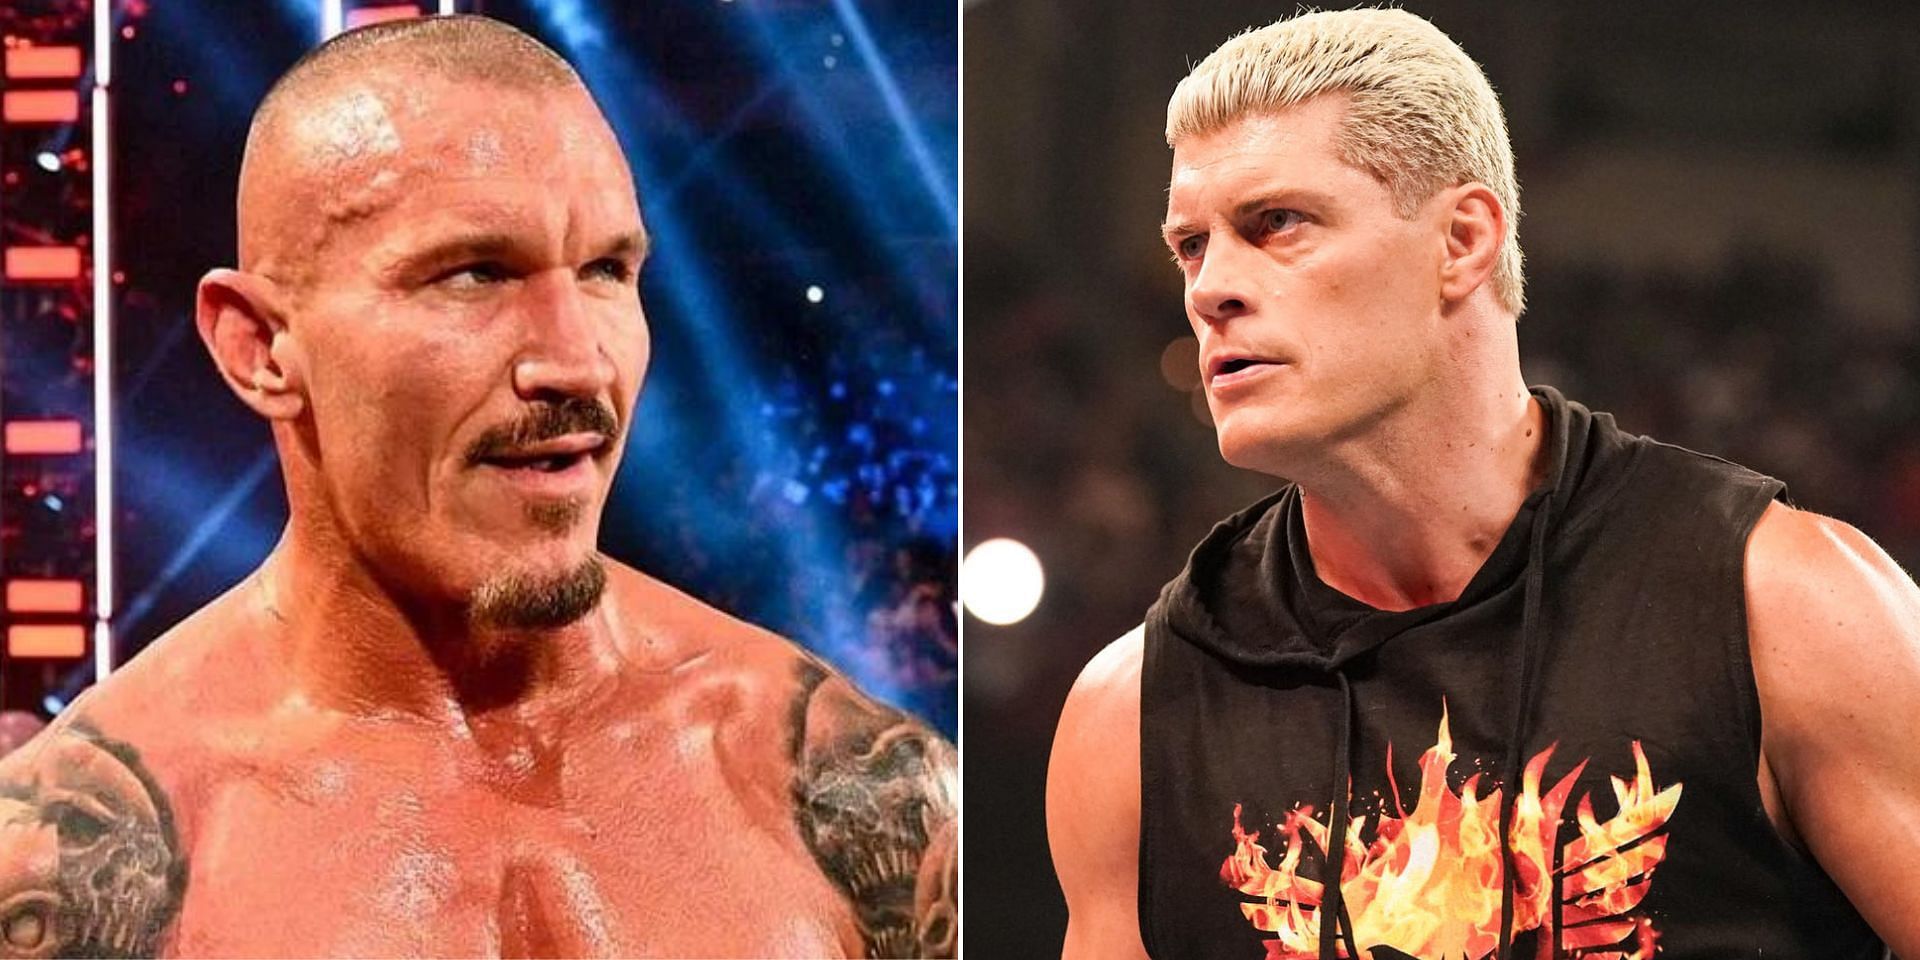 Could we see another feud between Randy Orton and Cody Rhodes in WWE?